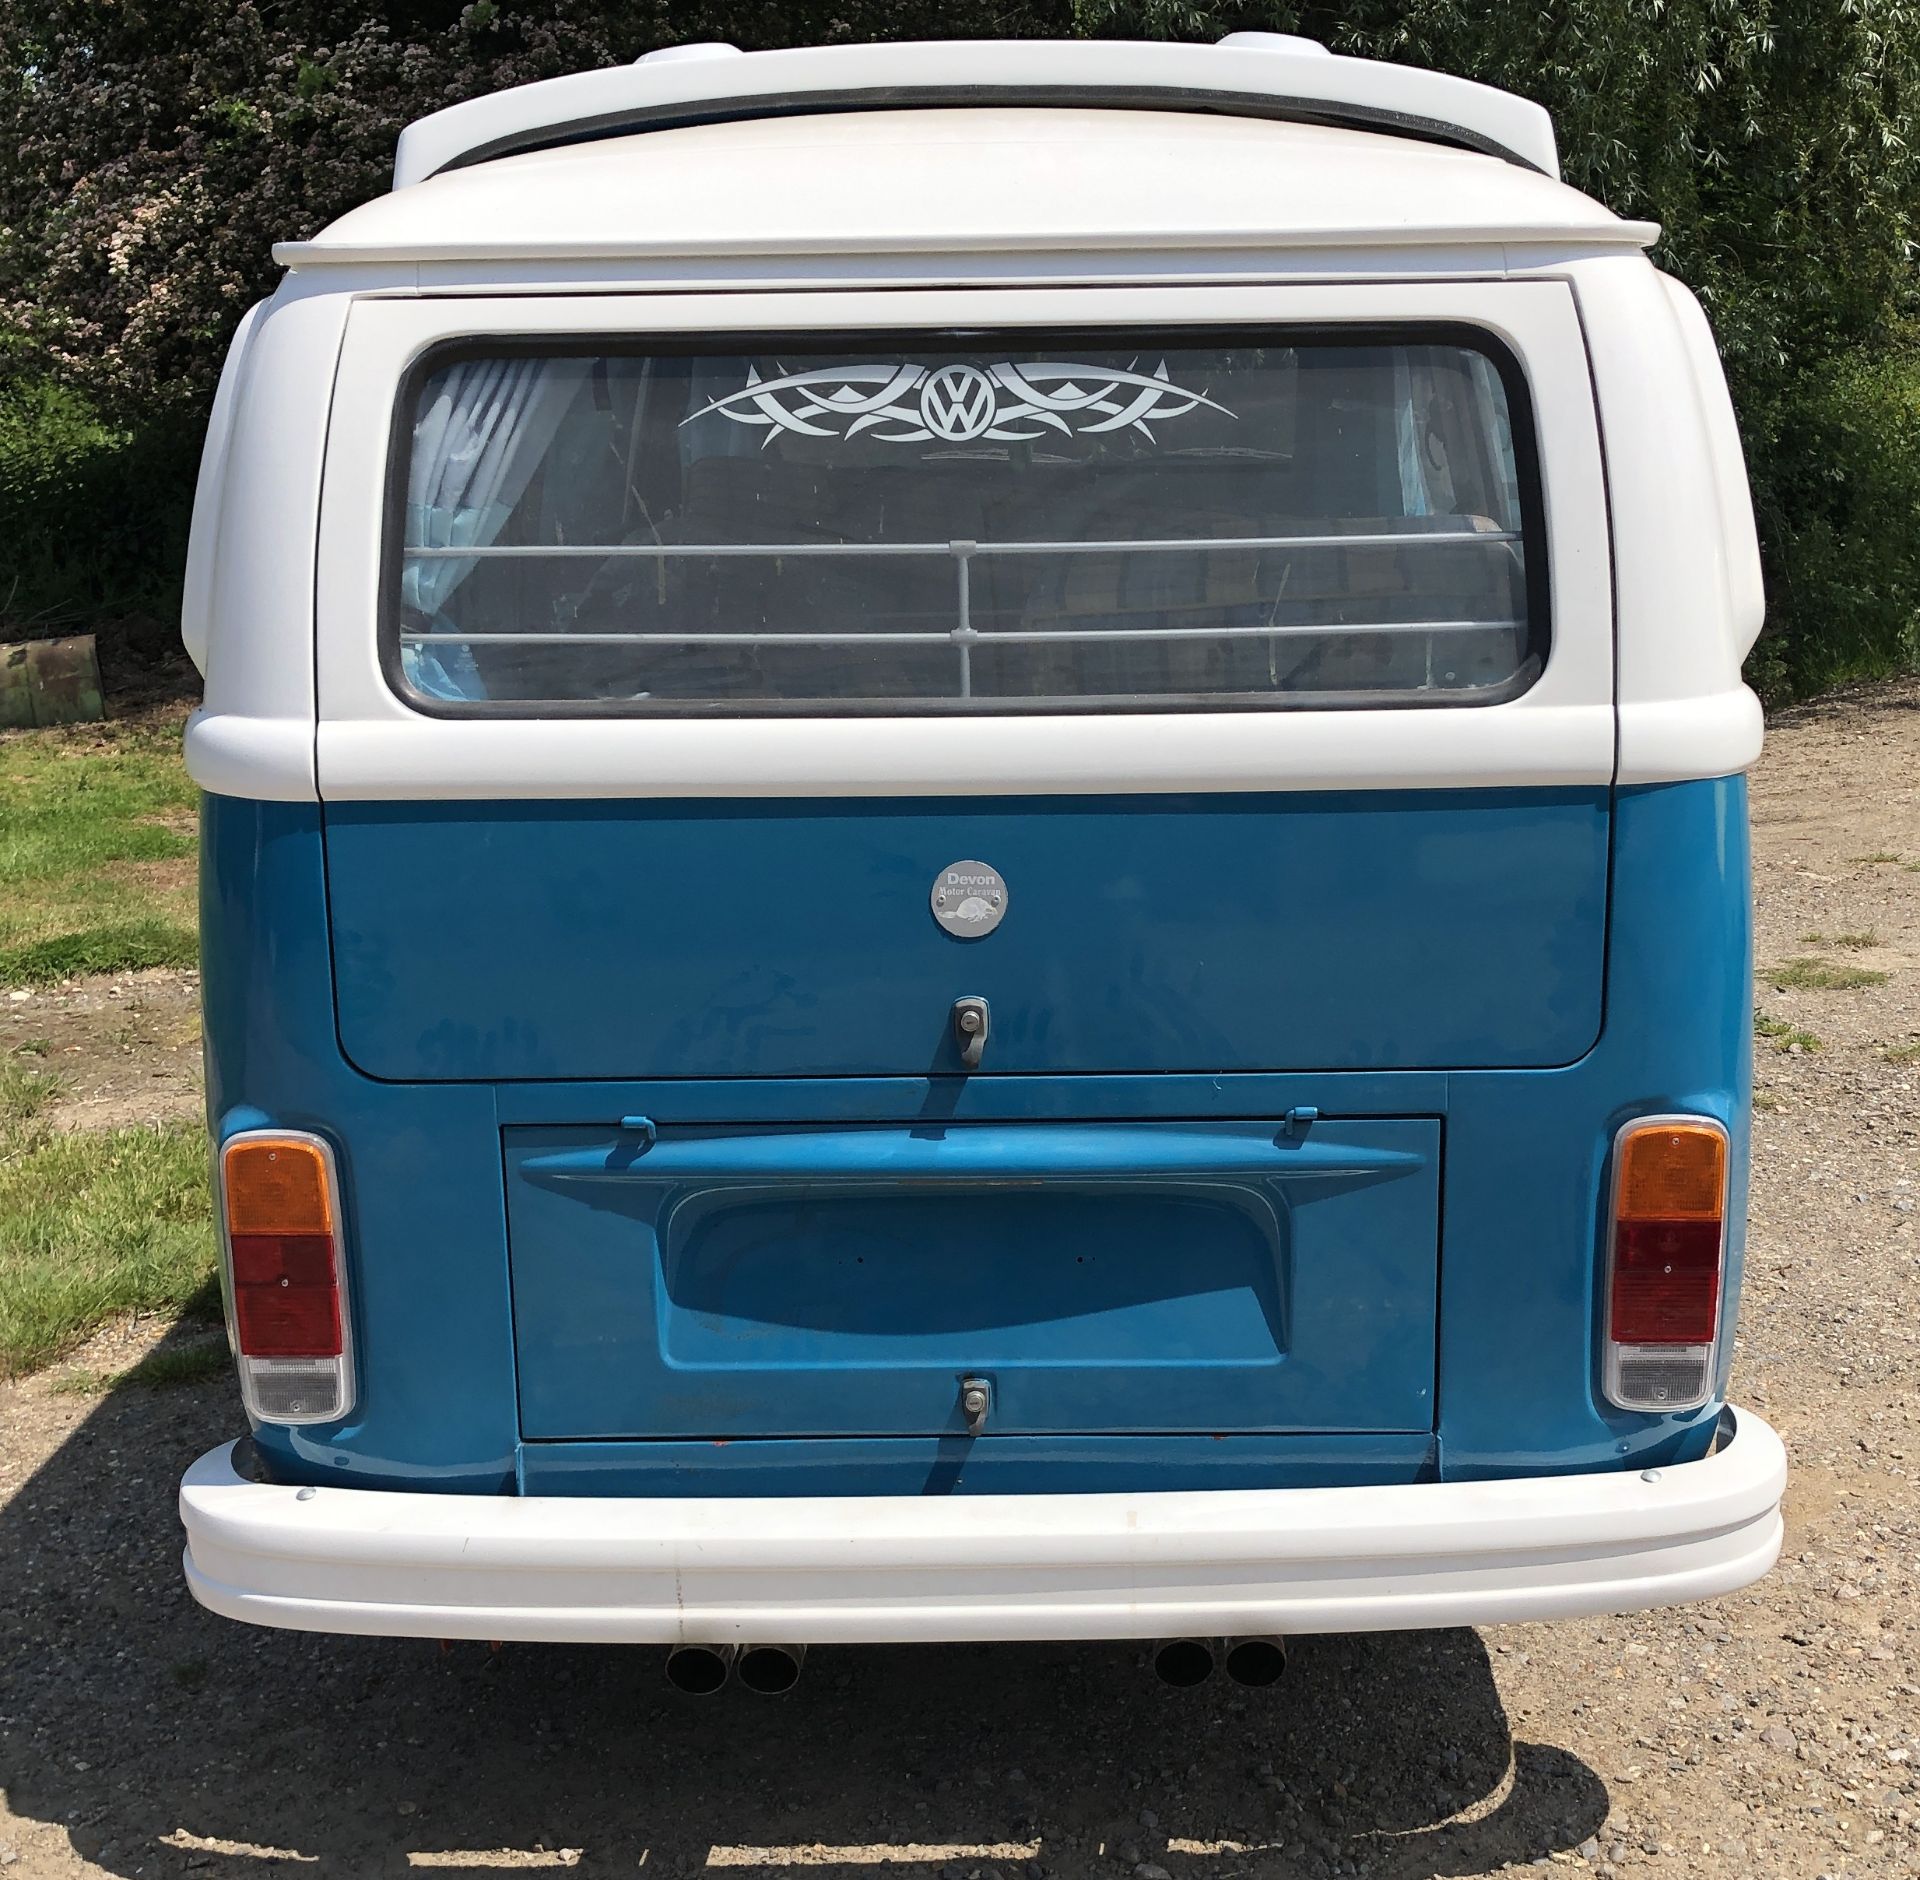 VW Microbus 8 Seater Caravanette Devon, Petrol, Registration UMH 420S, First Registered 14th March - Image 7 of 47